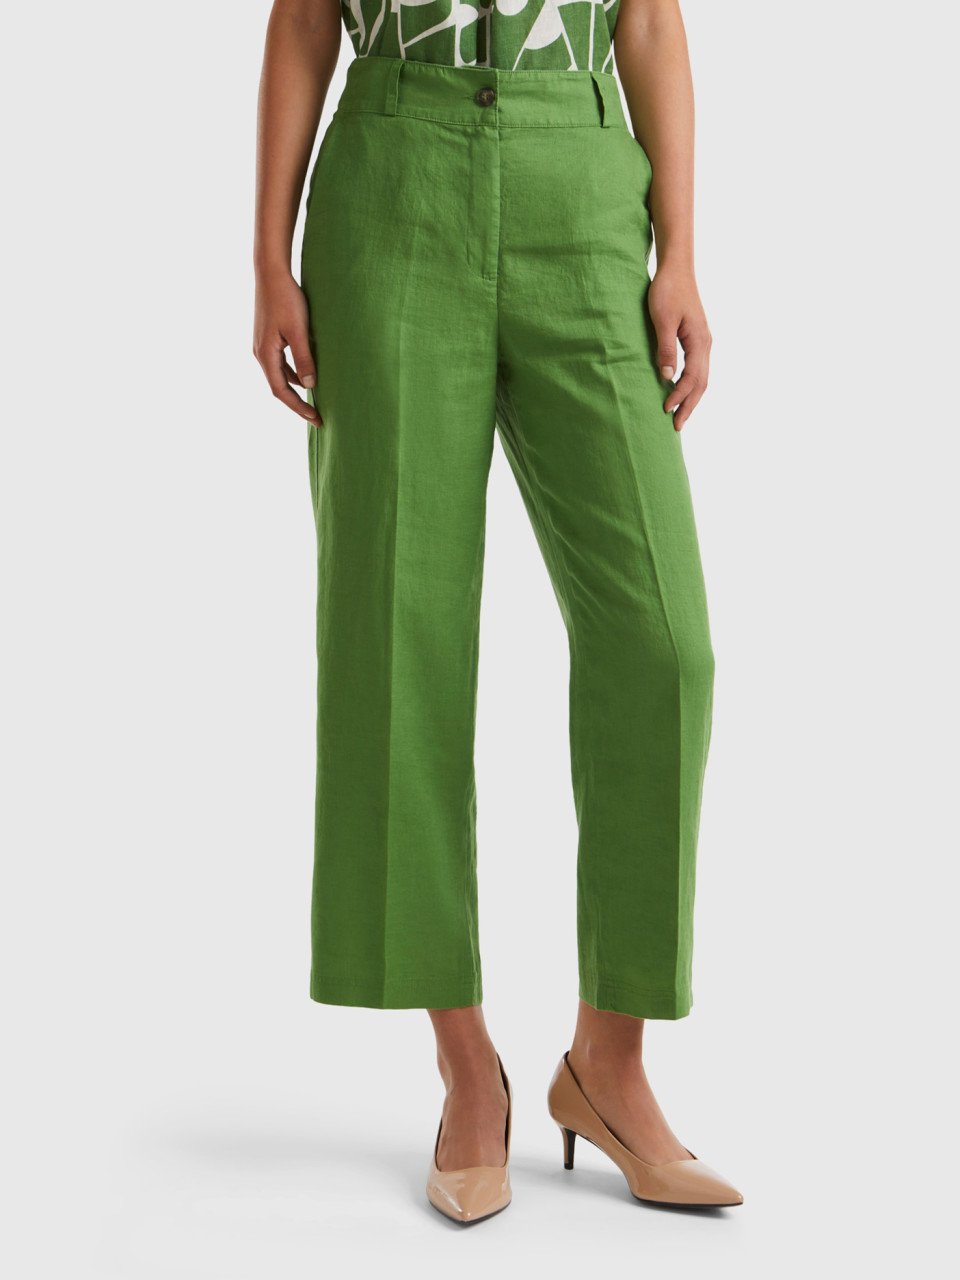 Benetton, Straight Trousers In Pure Linen, Military Green, Women